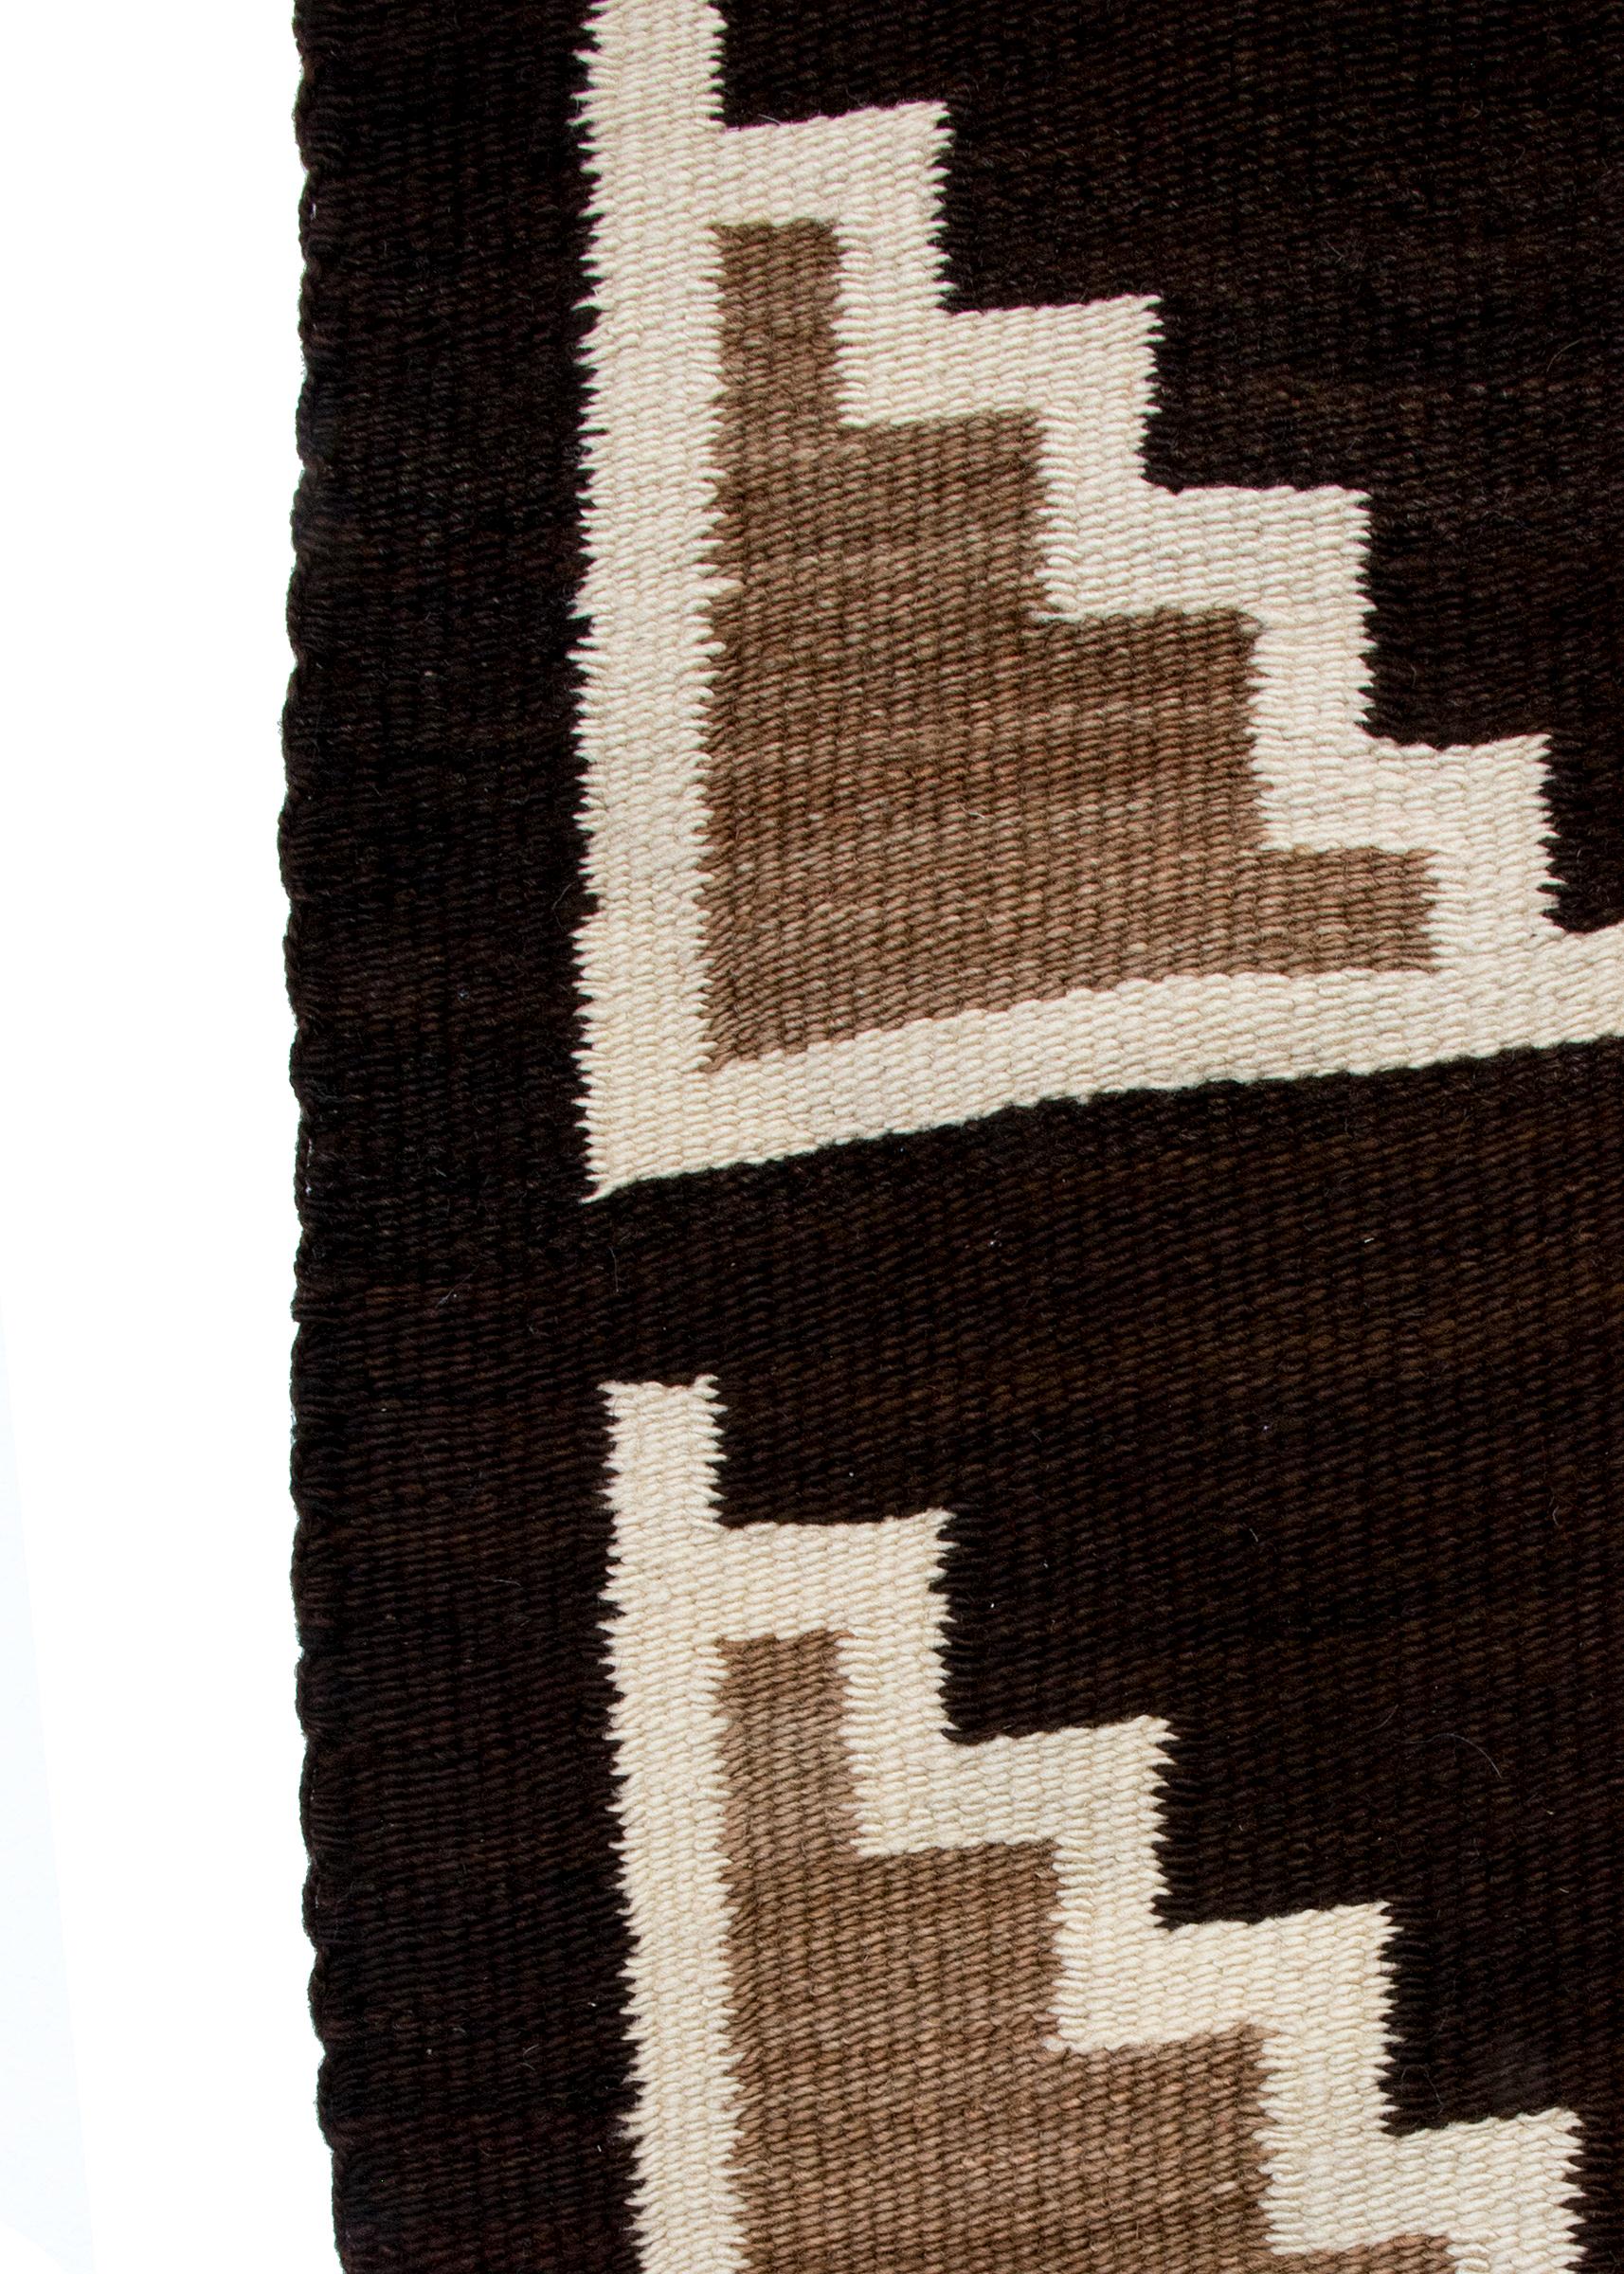 American Vintage Large Navajo Area Rug, Southwestern Red, Brown, White, Gray, circa 1930s For Sale